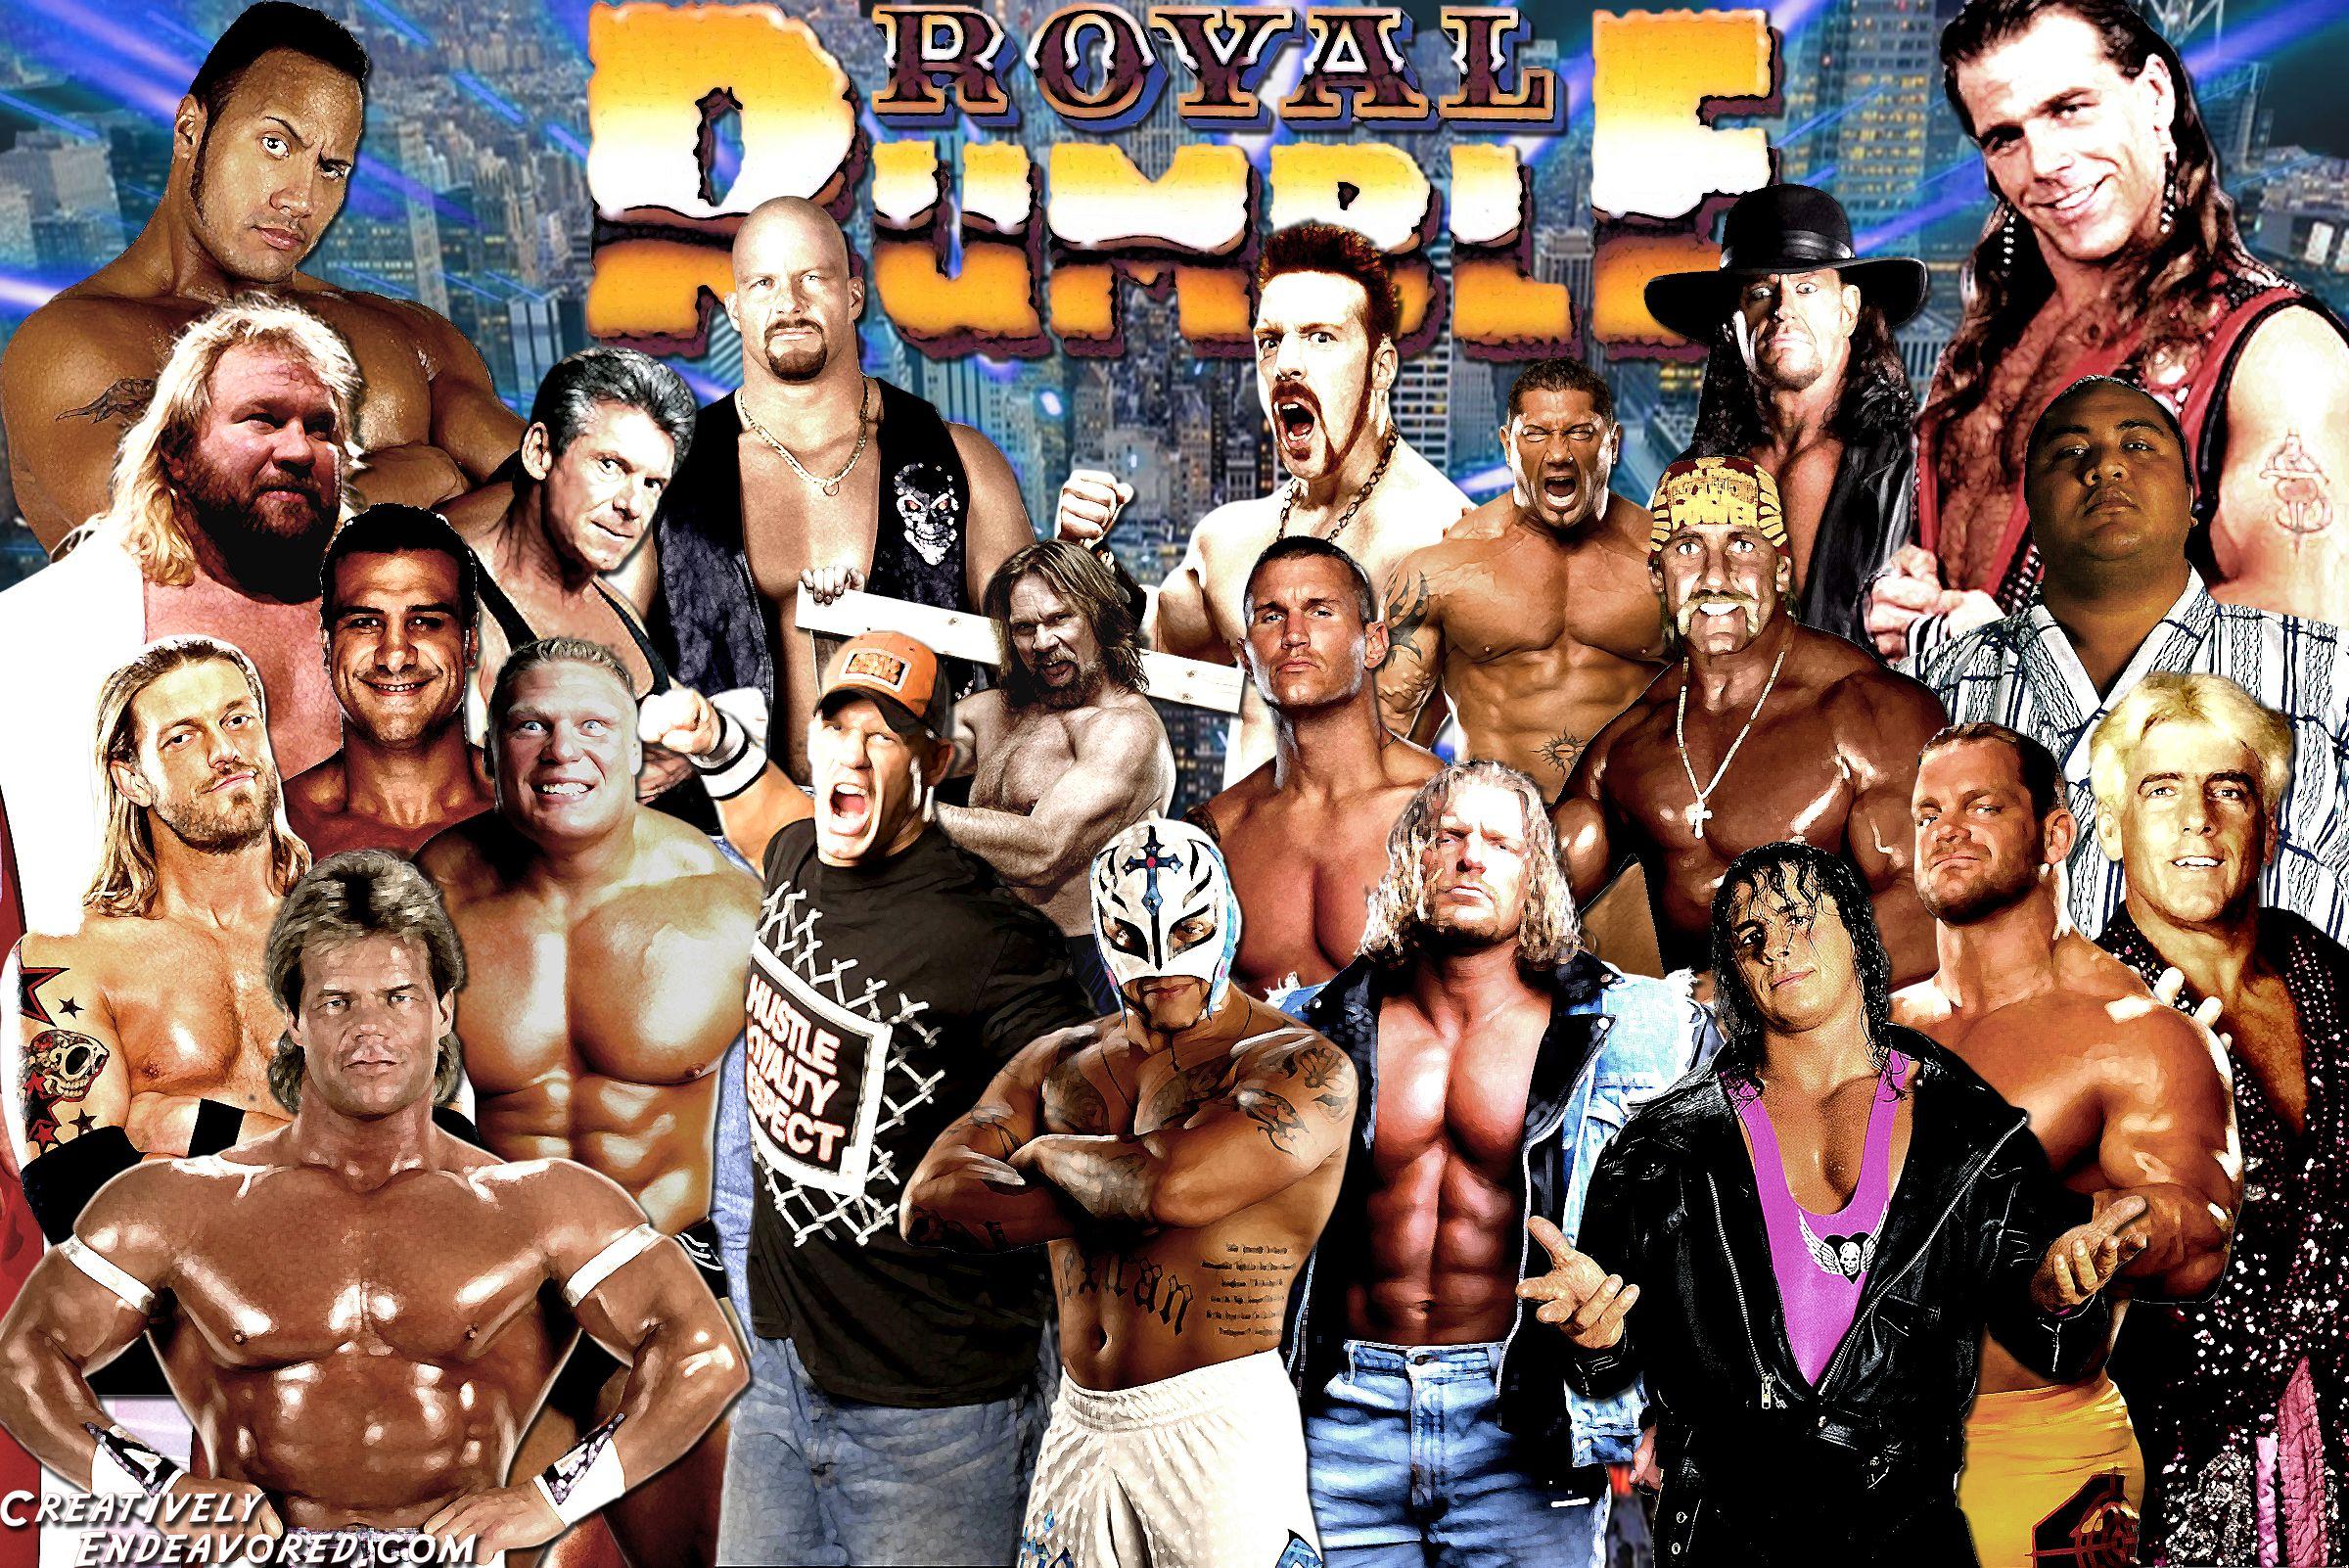 Creatively Endeavored Royal Rumble Wallpaper